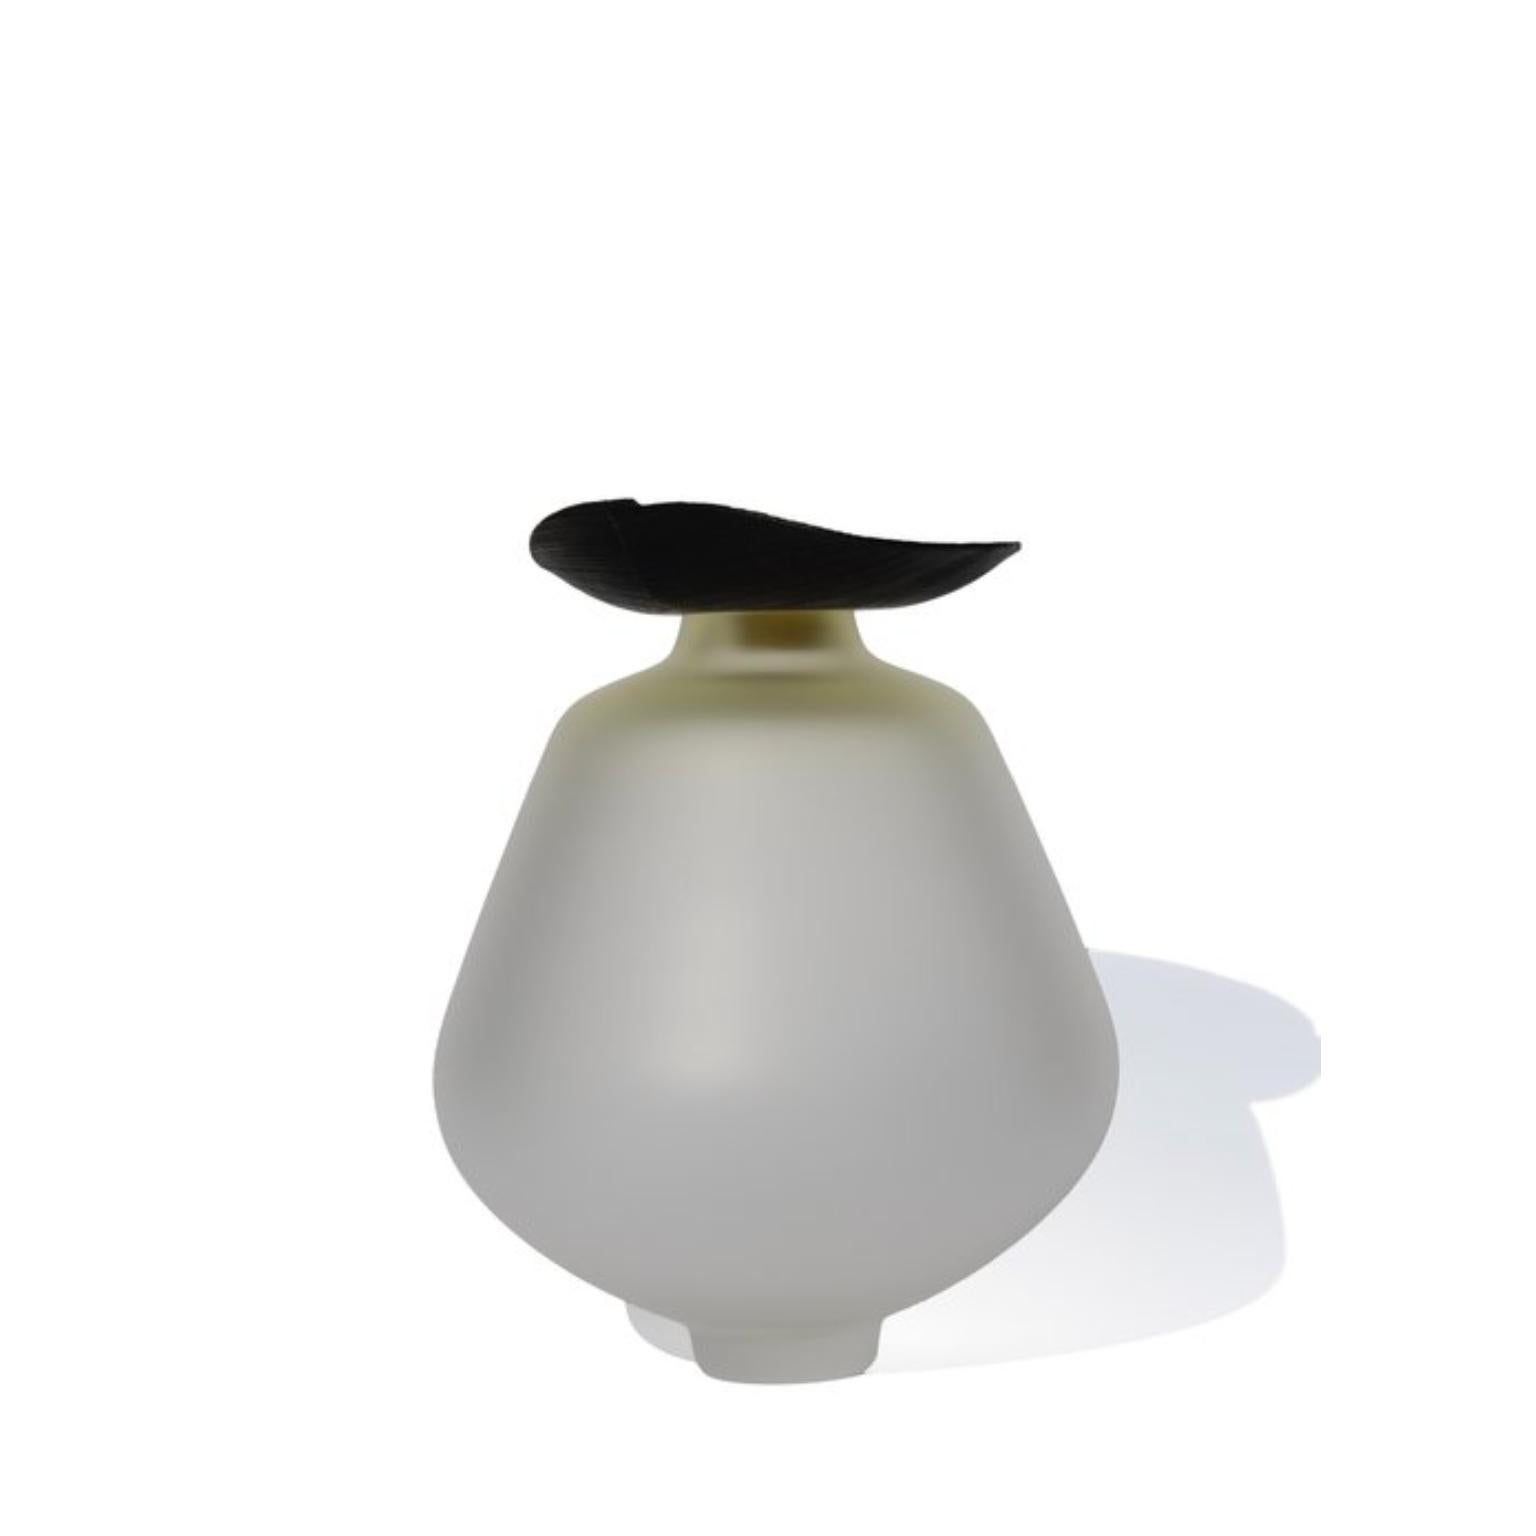 Fukui Stacking Satin Lemon Vessel by Pia Wüstenberg
Unique Piece. Handmade In Europe.
Dimensions: Ø 22 x H 26 cm.
Materials: Handblown glass and wood.

Available in different color options. Dimensions are approximate, due to the handmade nature of